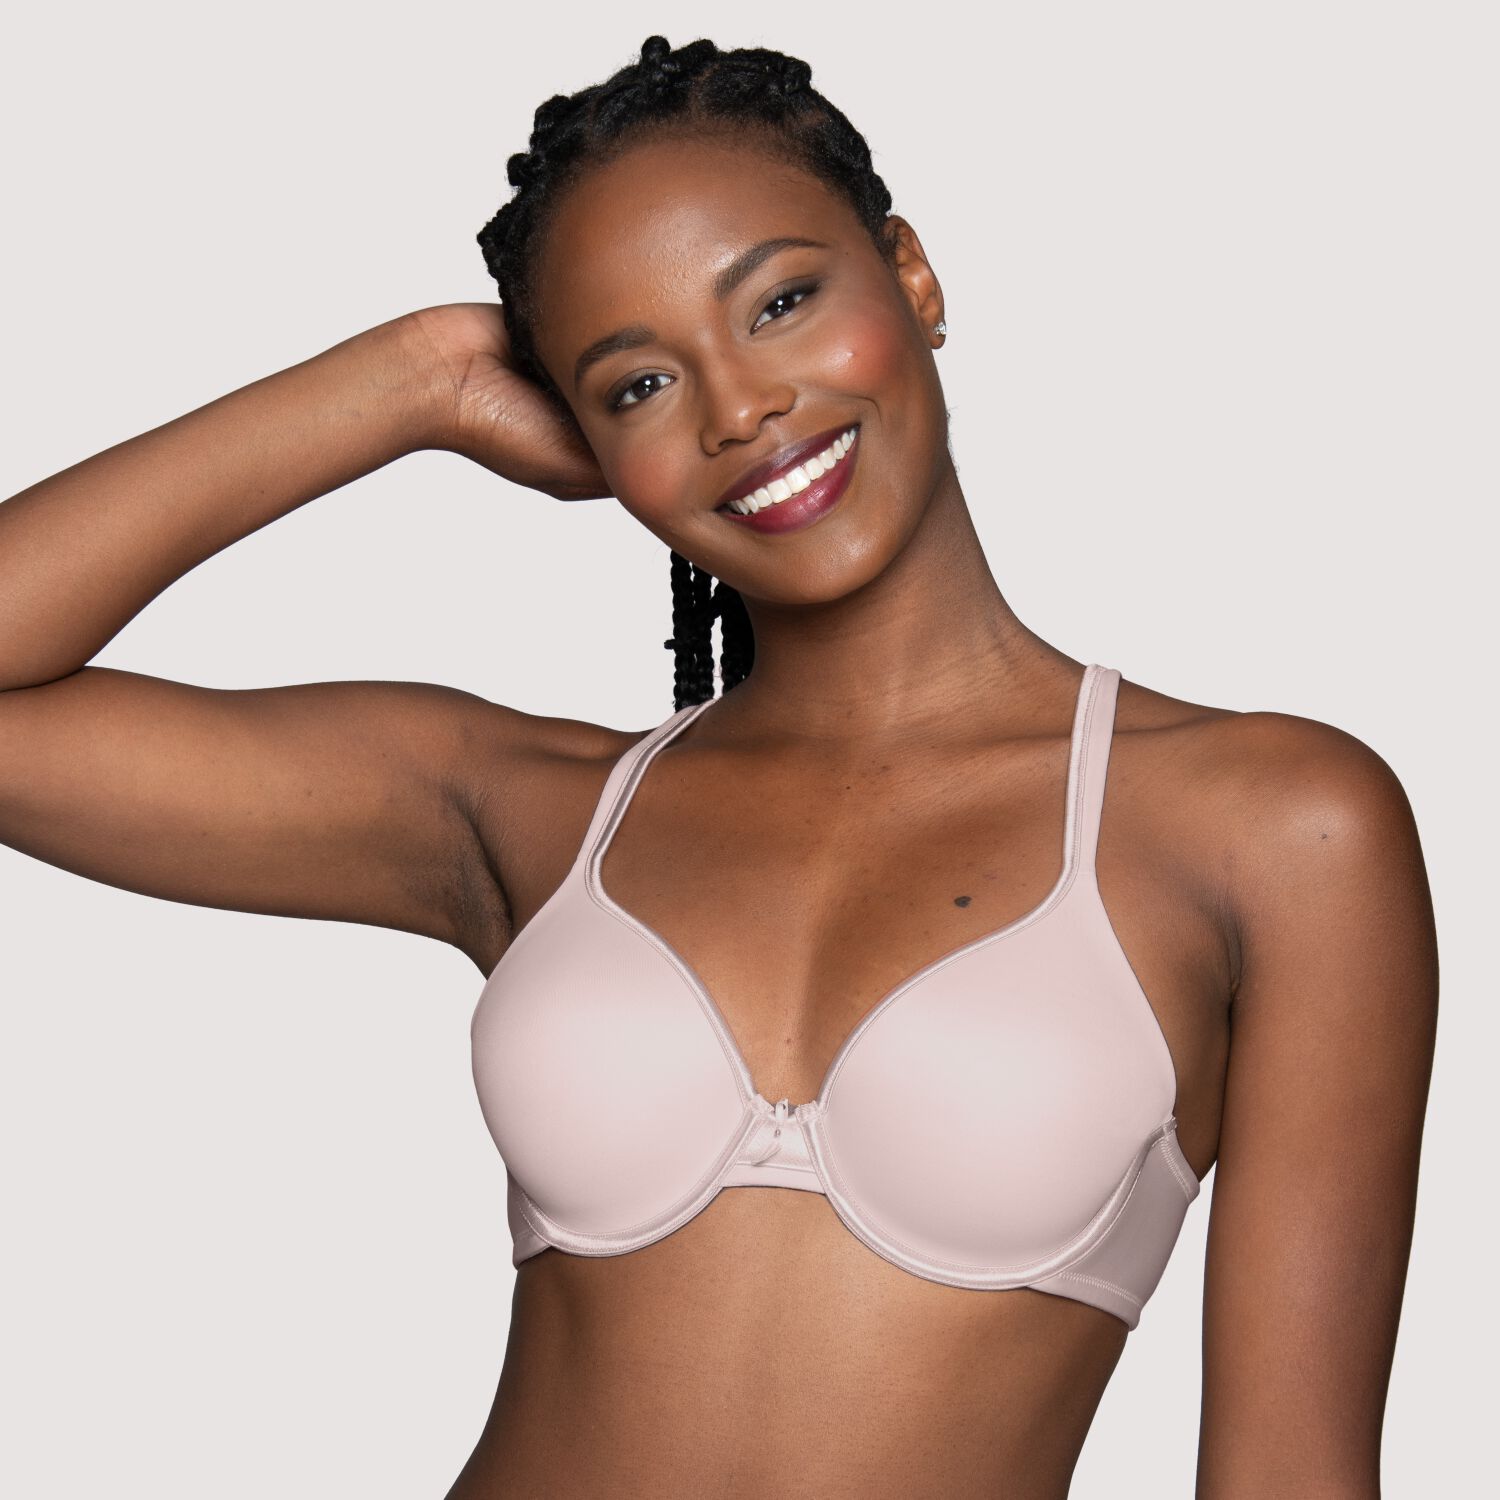 79 Cross Strap Bra Royalty-Free Photos and Stock Images